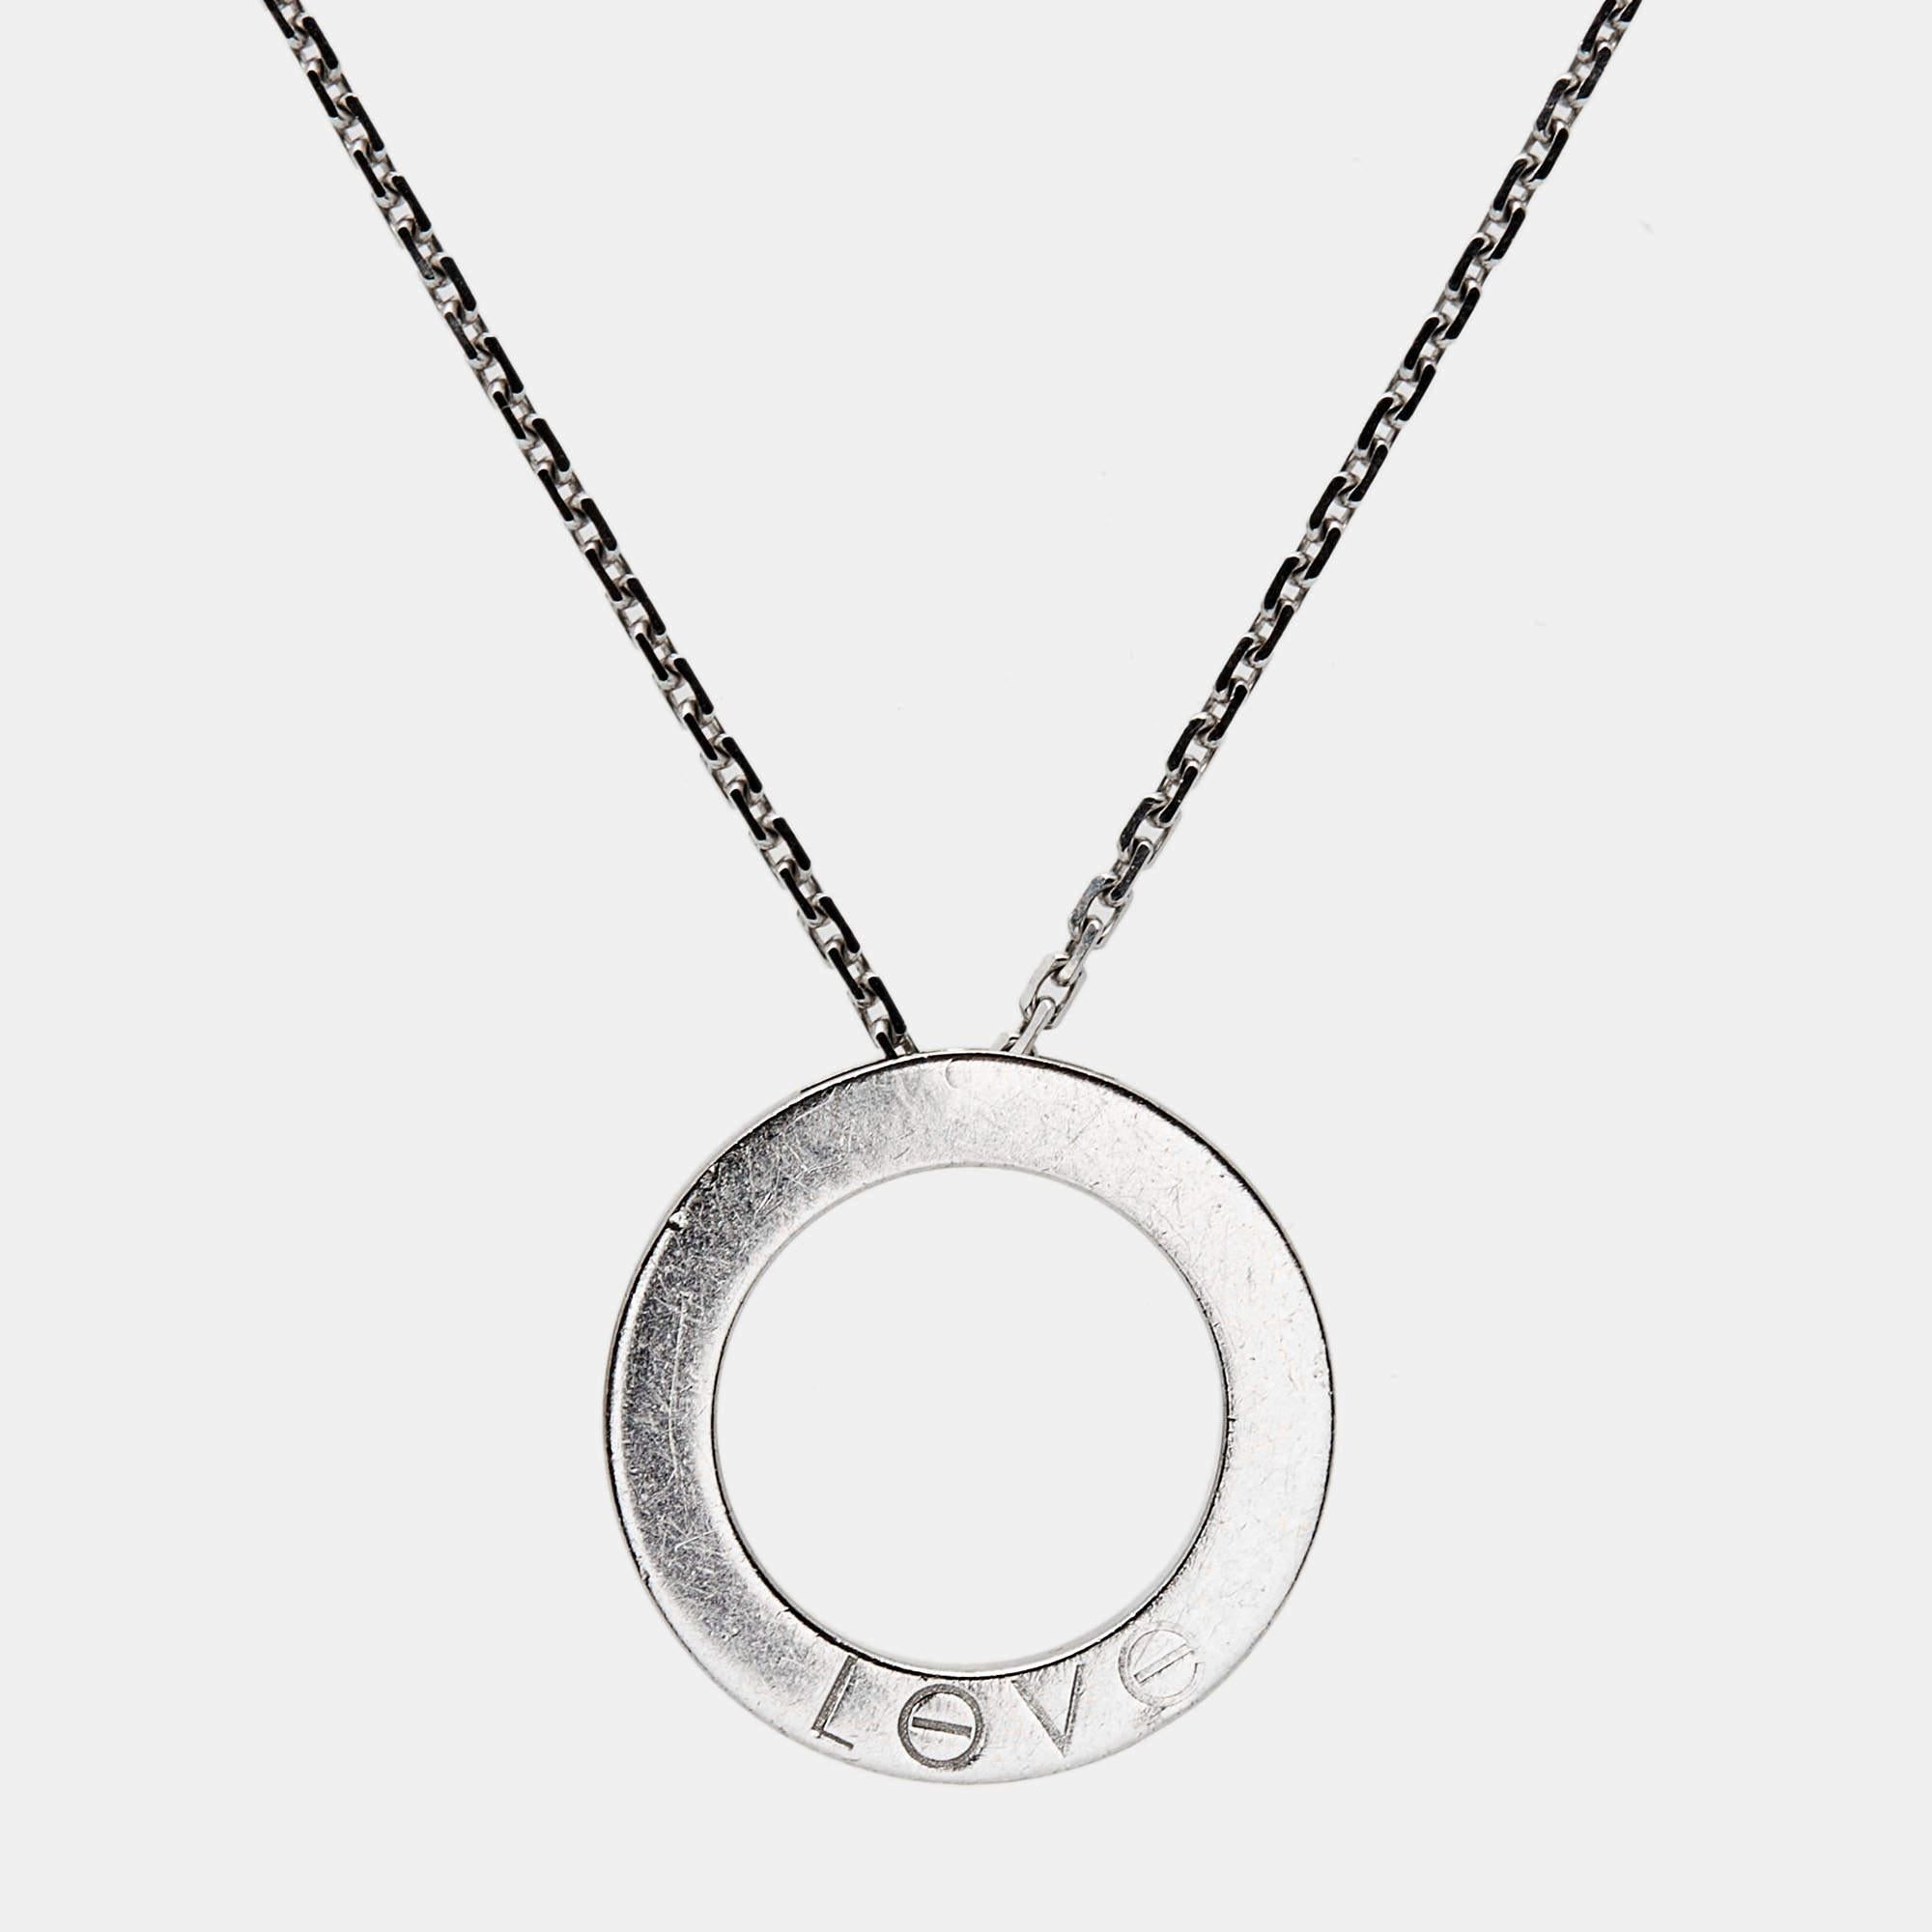 This radiant Love necklace from Cartier is not only beautiful to look at but also a timeless piece that will be cherished for years to come! It has been crafted from 18K white gold and features a chain-link carrying a ring pendant that is detailed